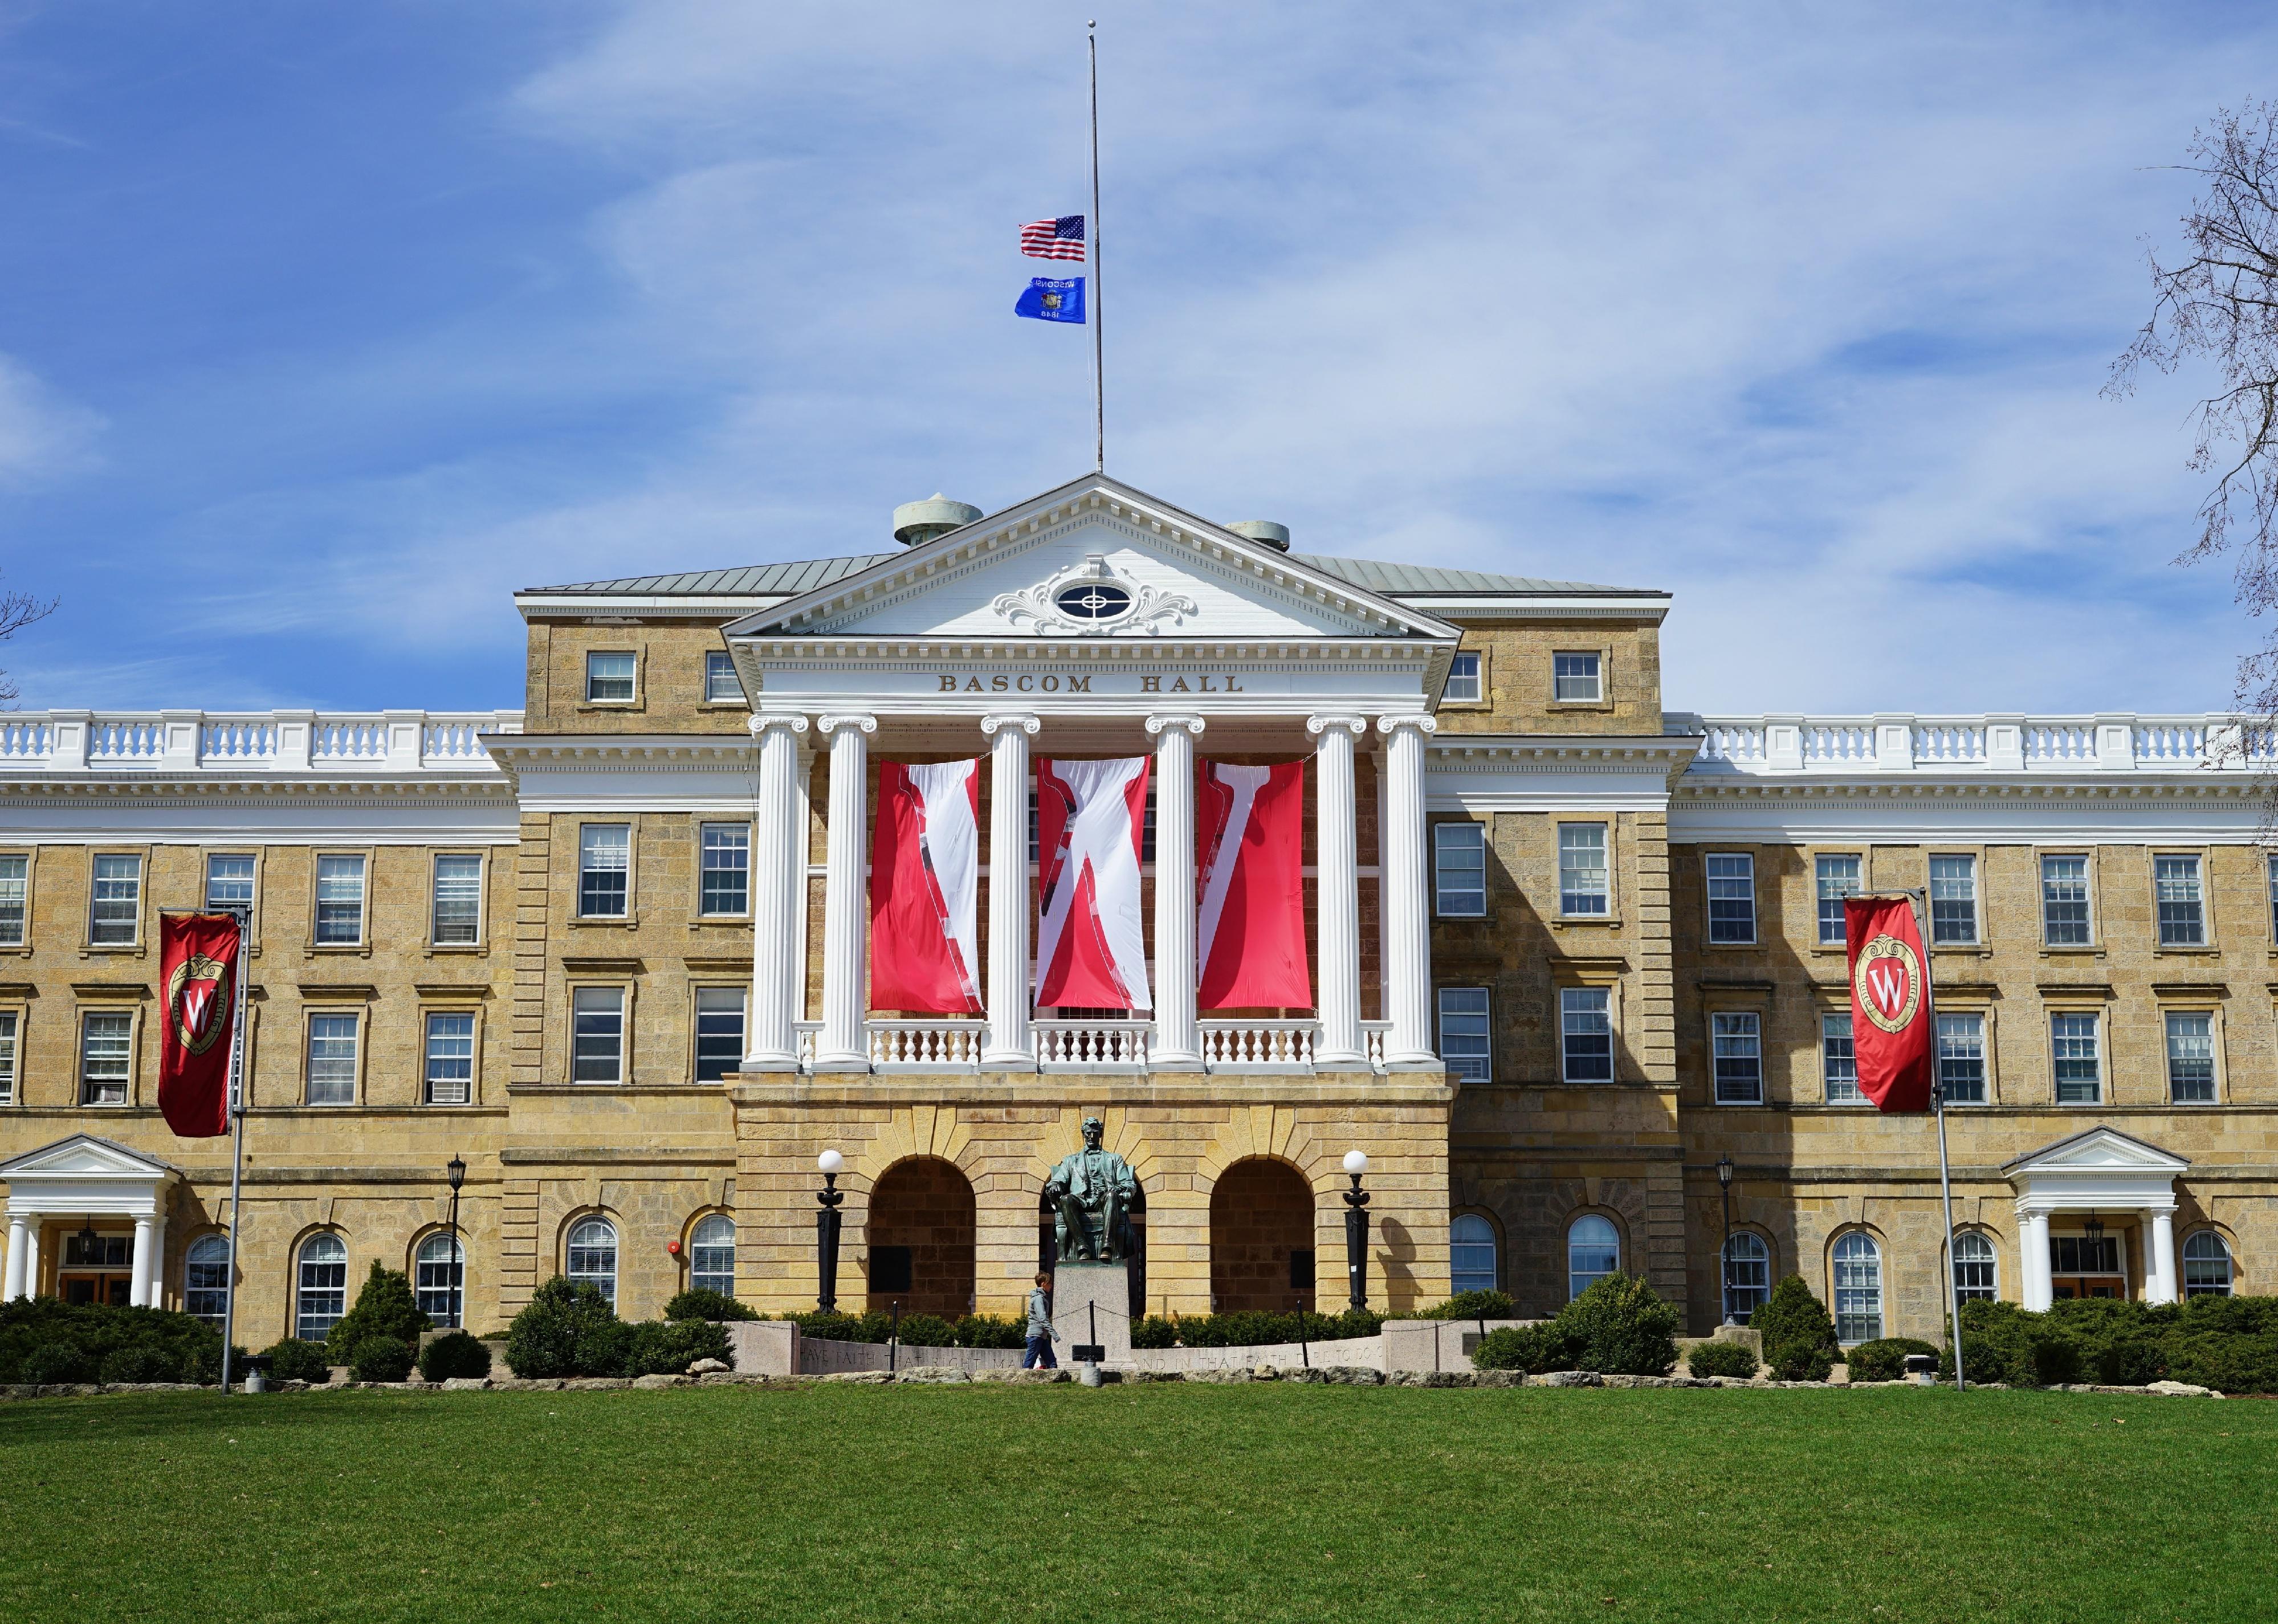 View of Bascom Hall administrative building on the campus of the University of Wisconsin Madison.